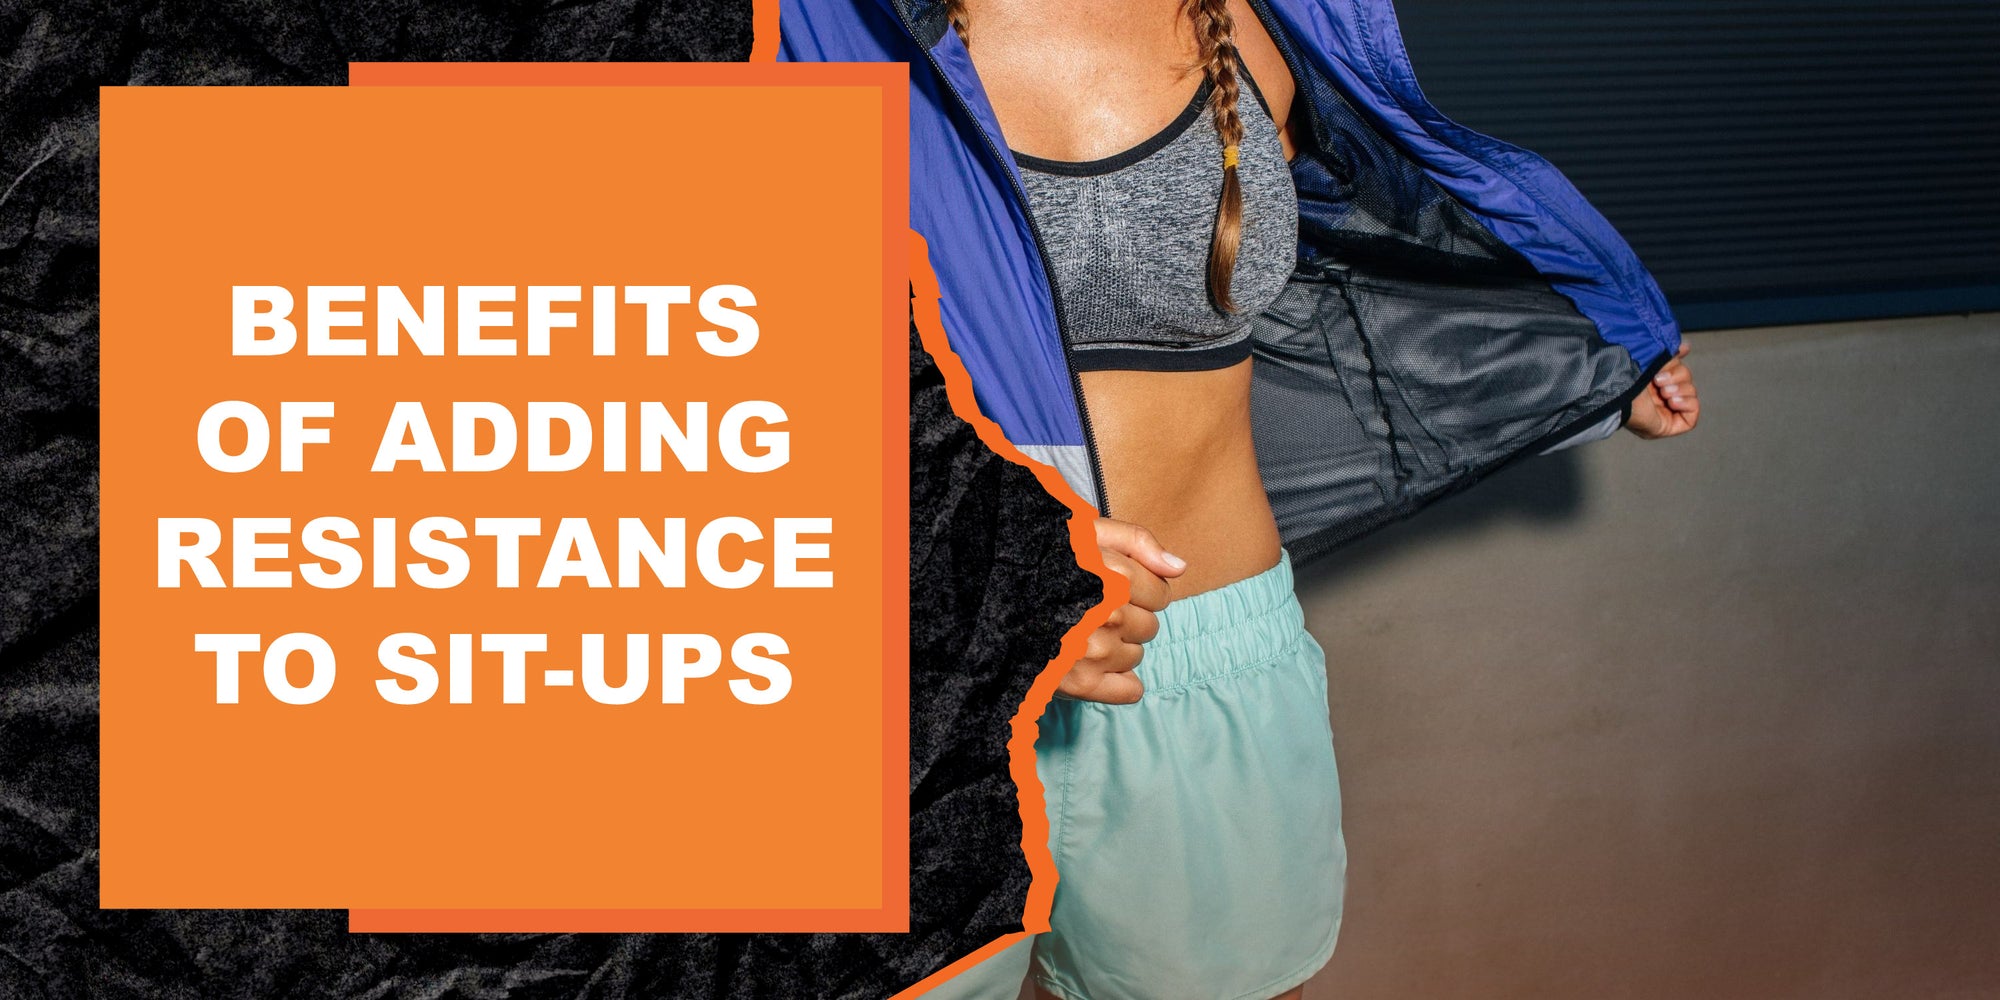 Benefits of Adding Resistance to Sit-Ups